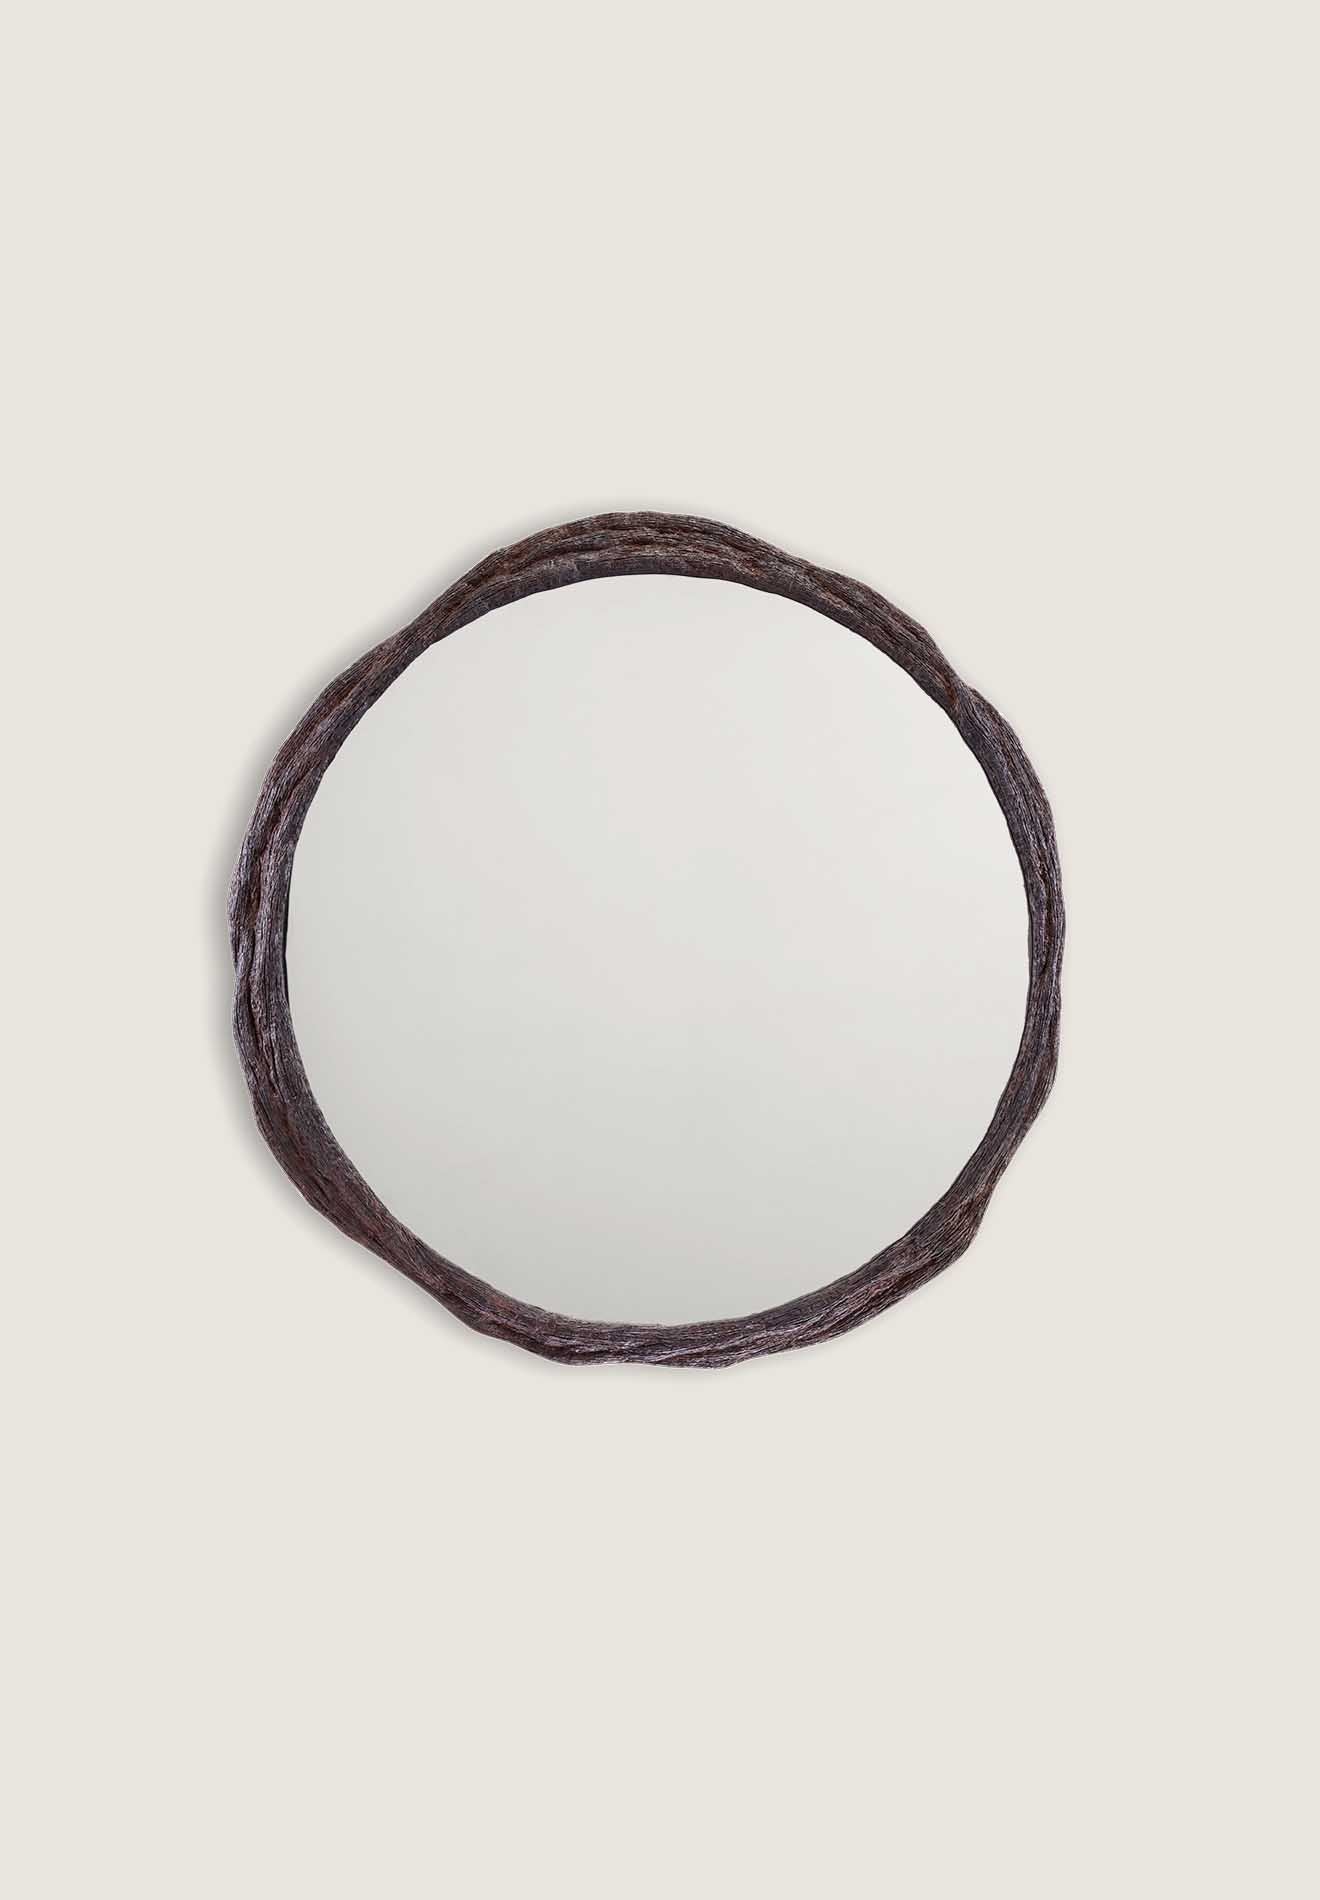 Burnt Wood with Mirror glass